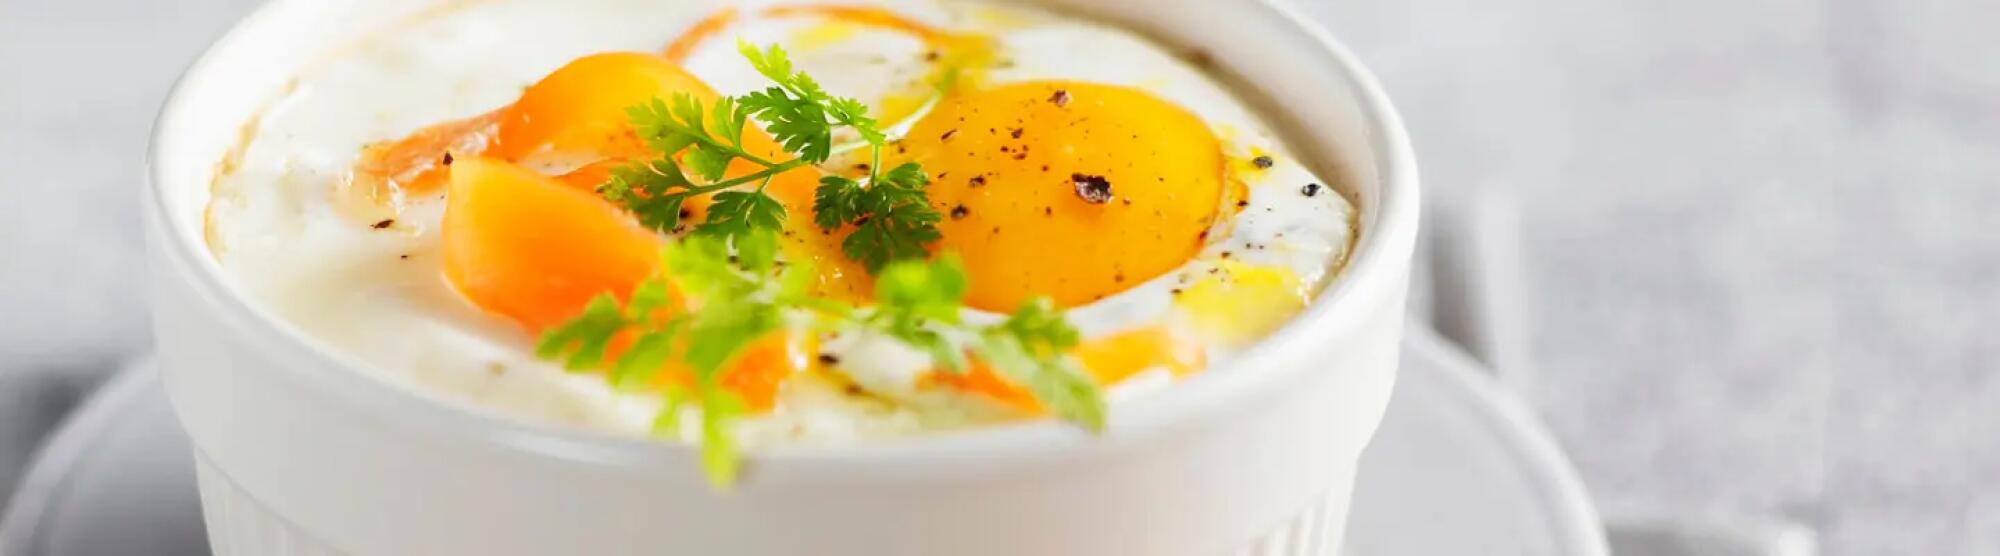 LA02_oeuf-cocotte-fromage